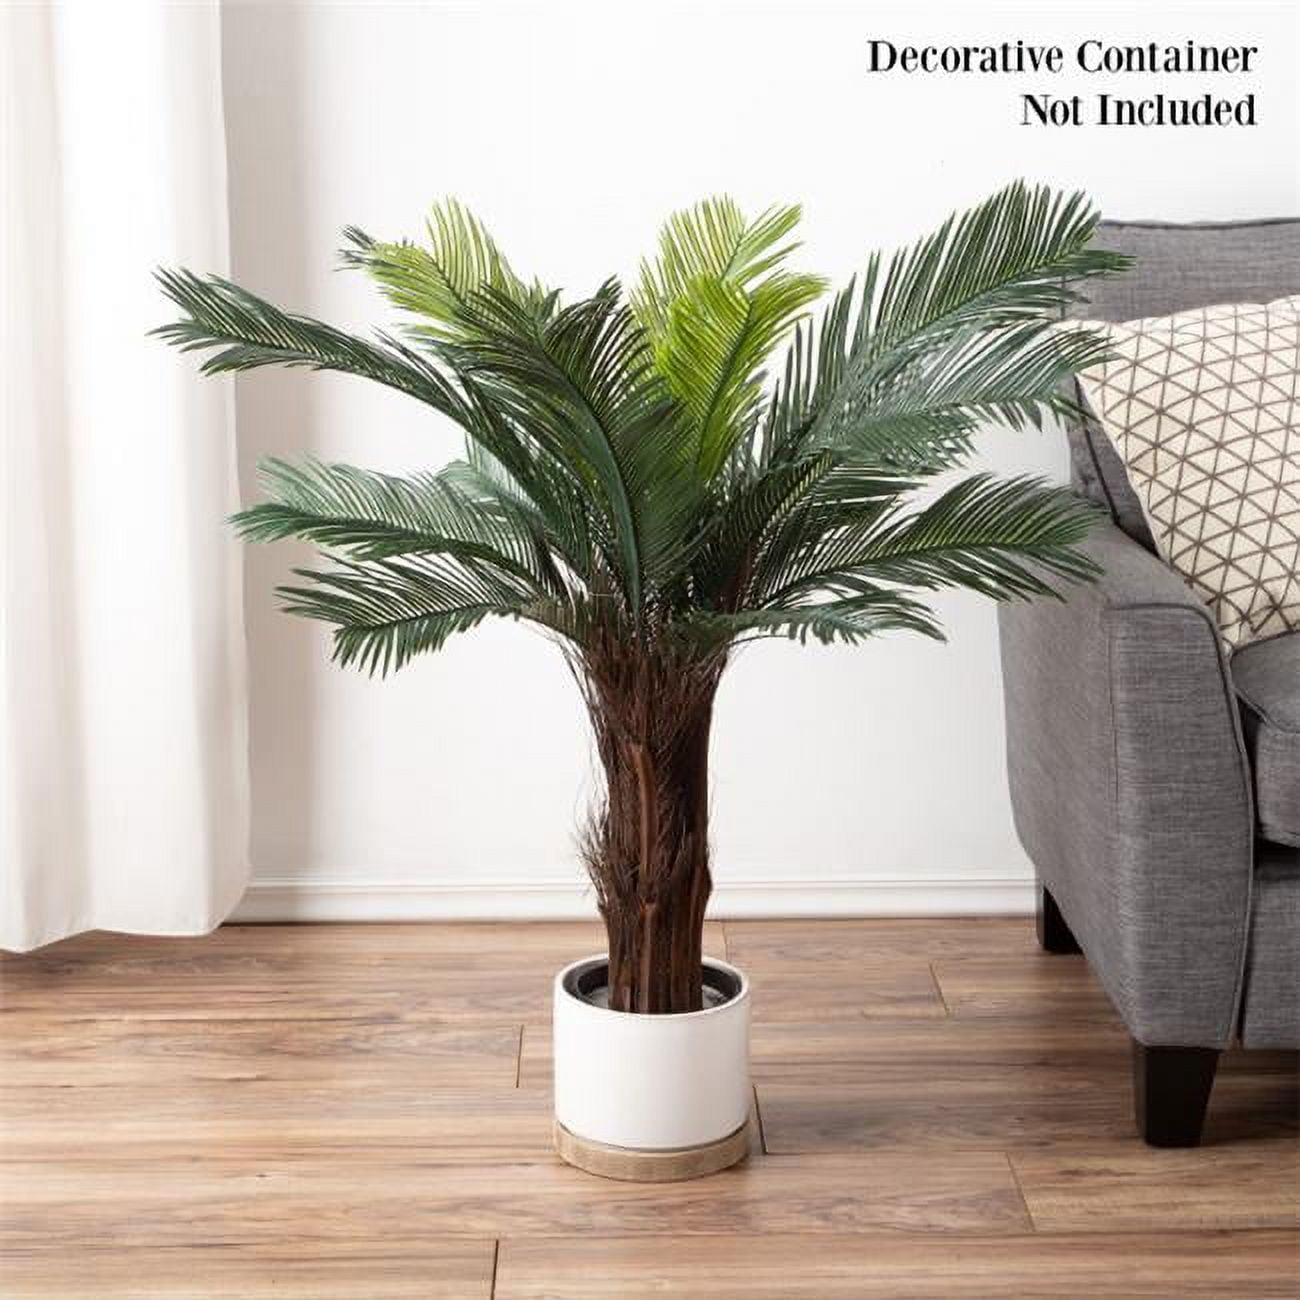 Pure Garden Artificial Cycas Palm Tree, 3-Foot Potted Faux Plant -Ornamental Greenery (Green, Brown)